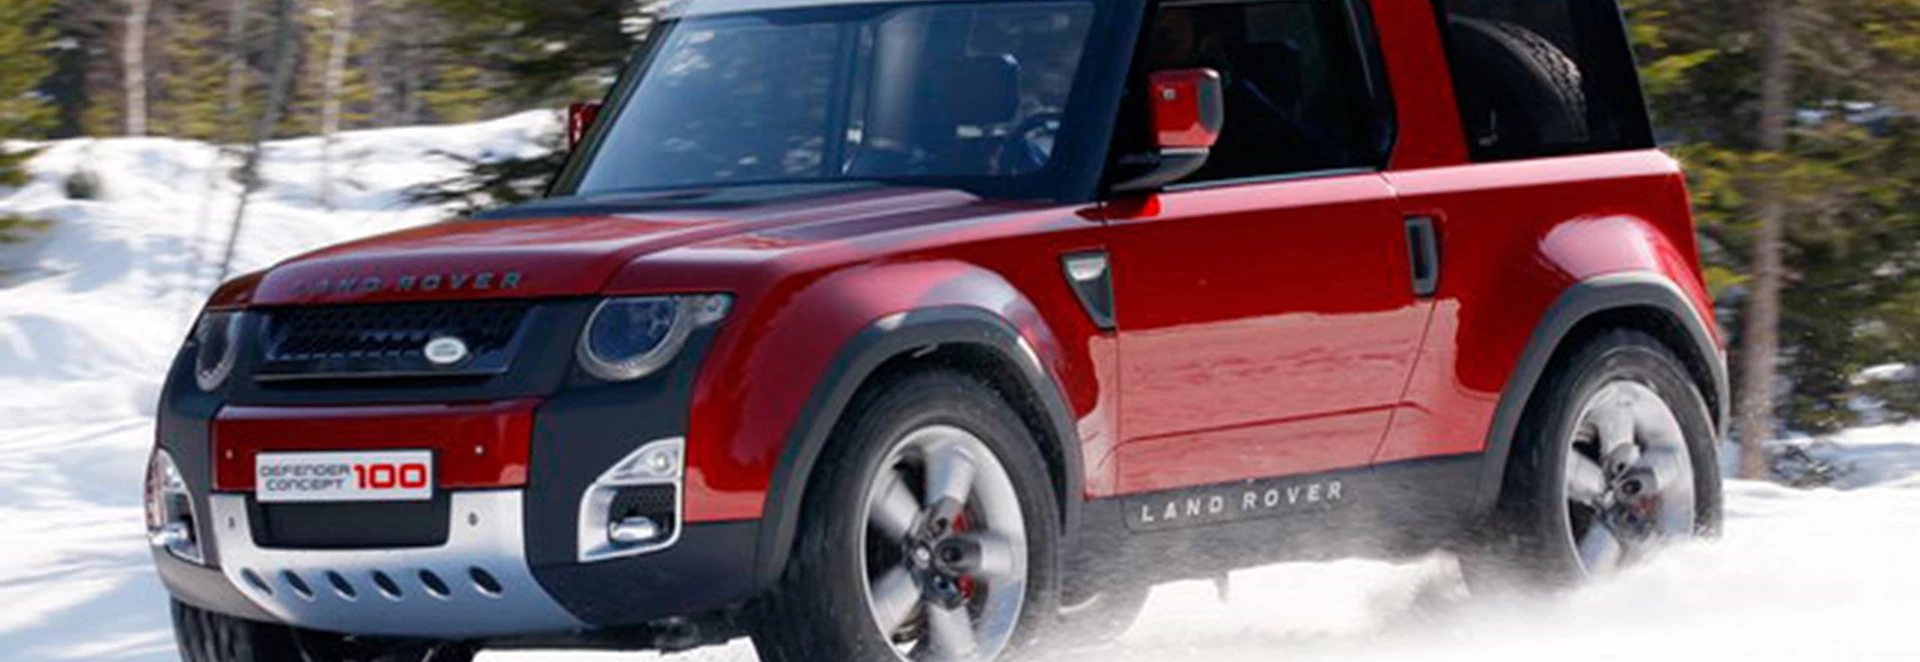 Land Rover wants to sell ten times as many new Defenders